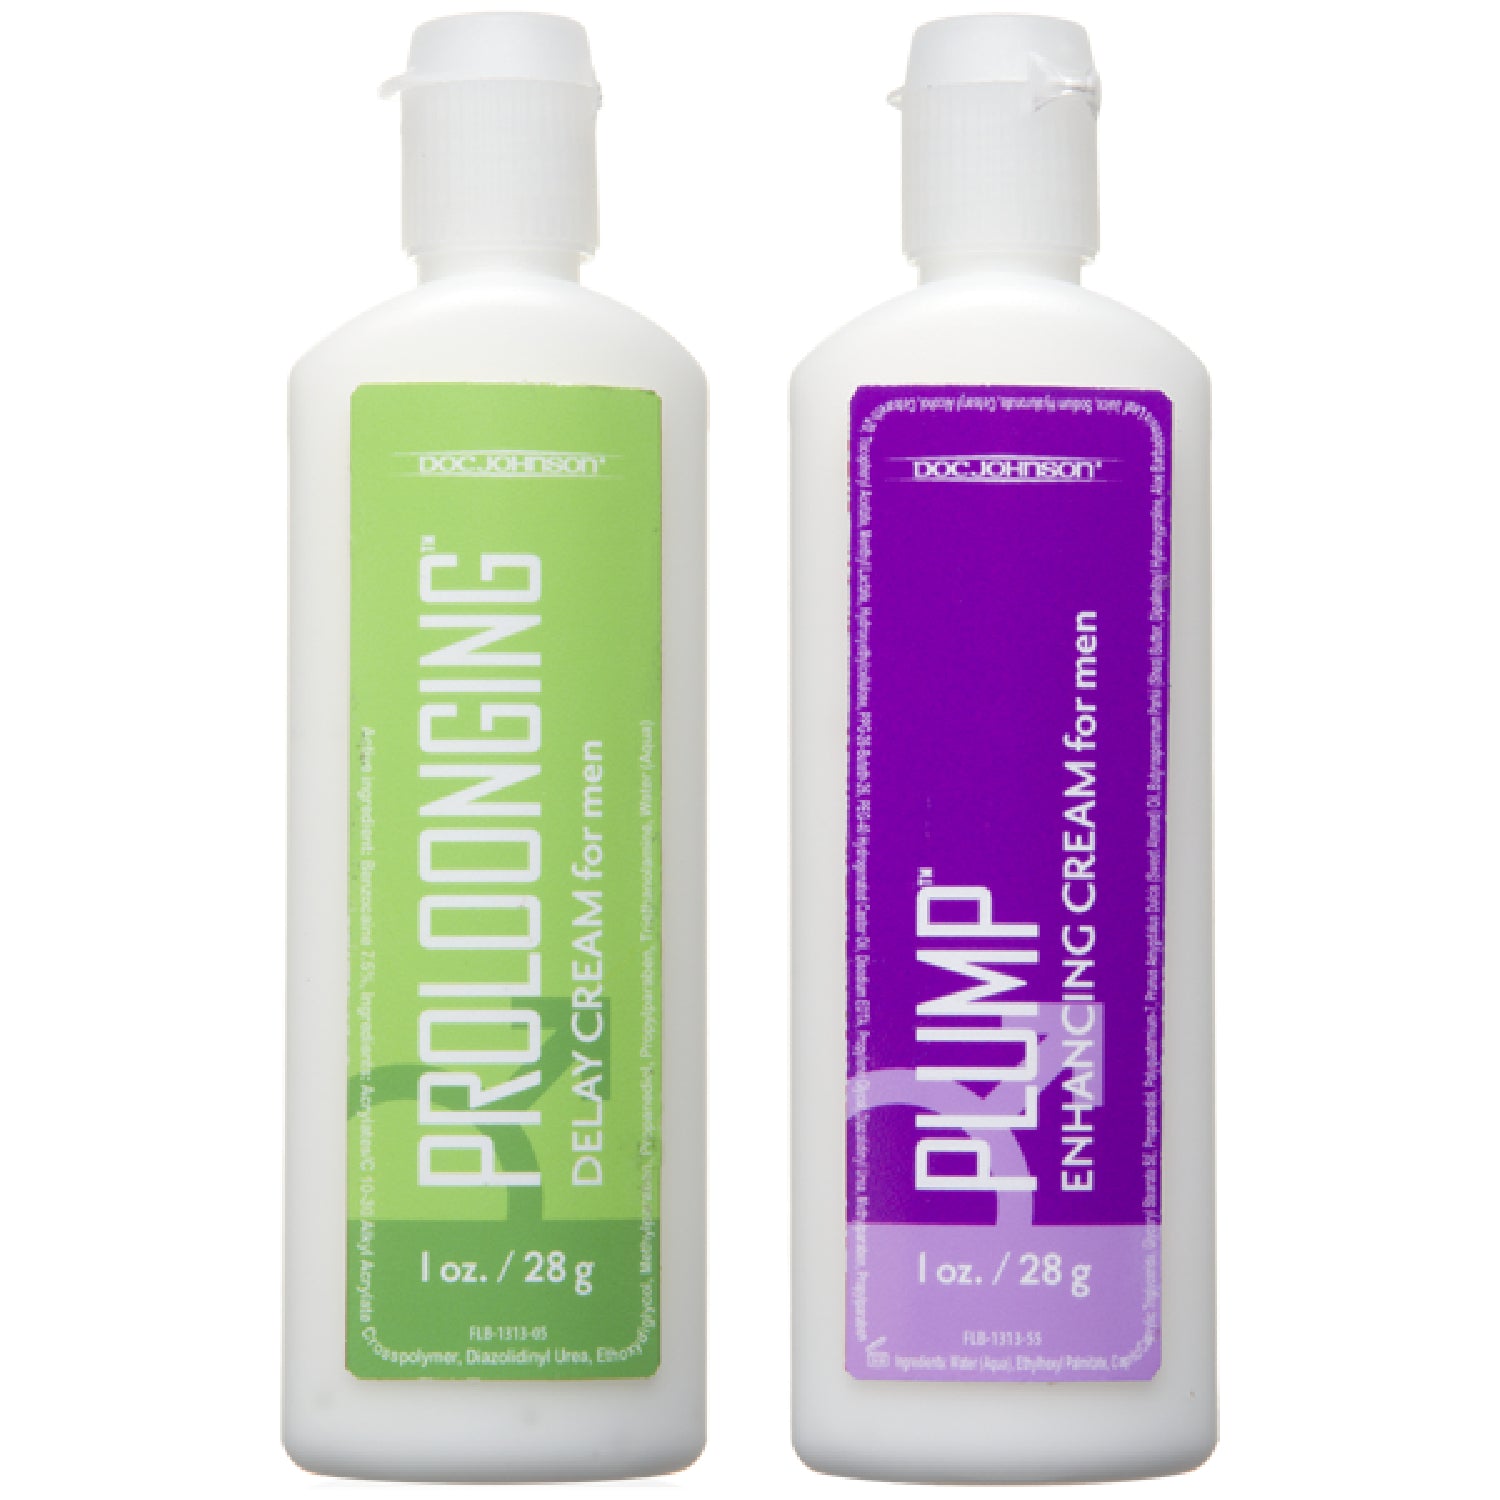 Proloonging   Plump For Men - 2-Pack - One Stop Adult Shop